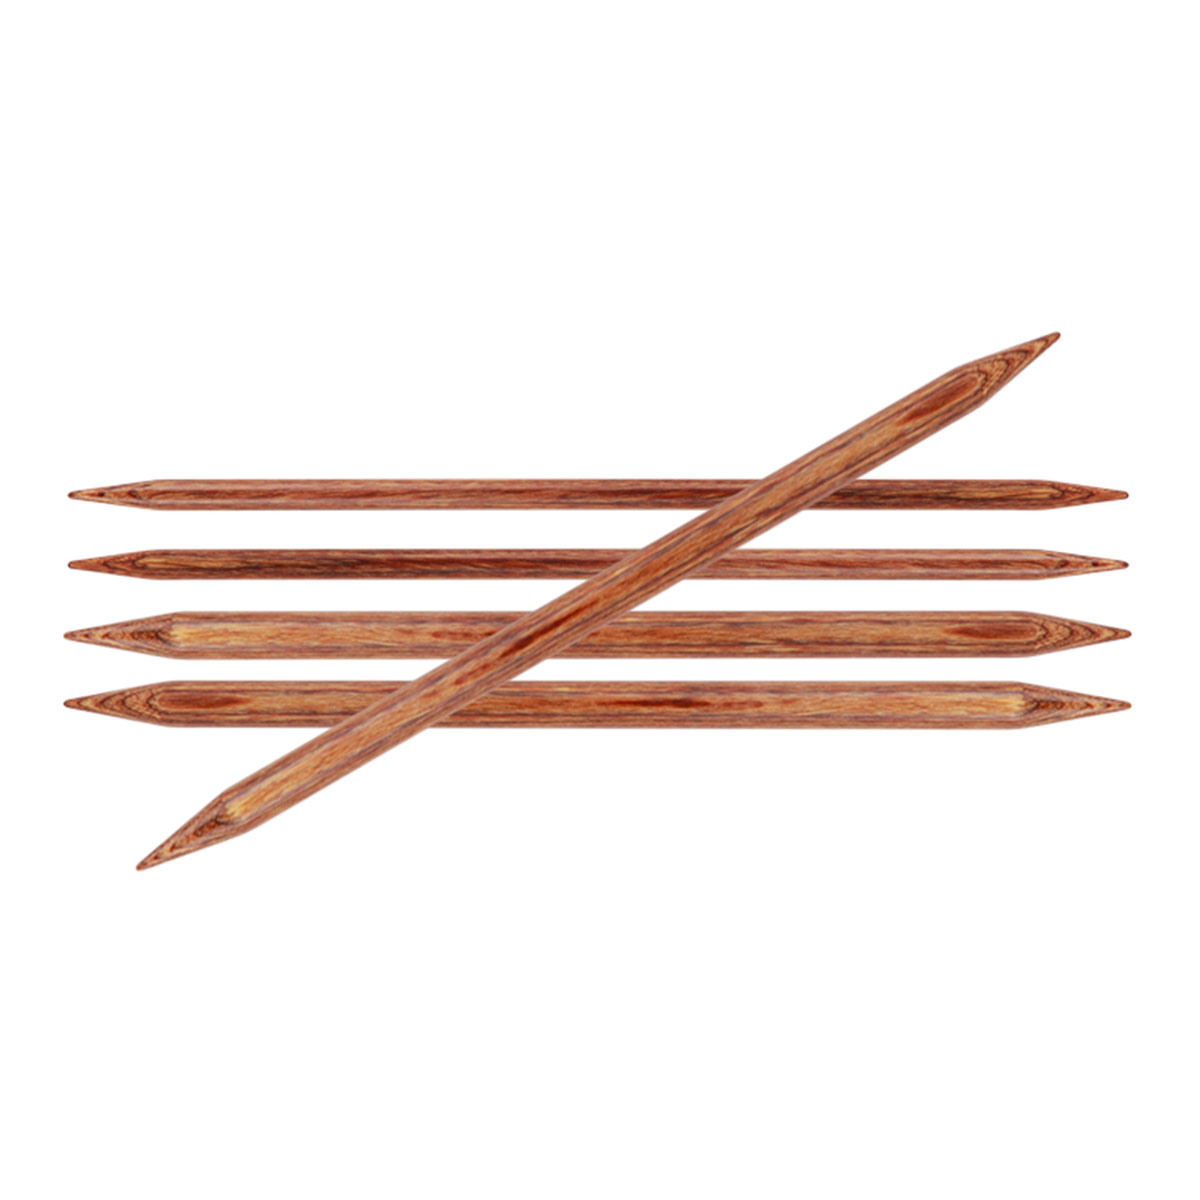 6 Double Point Knitting Needles, US 4 (3.5mm)